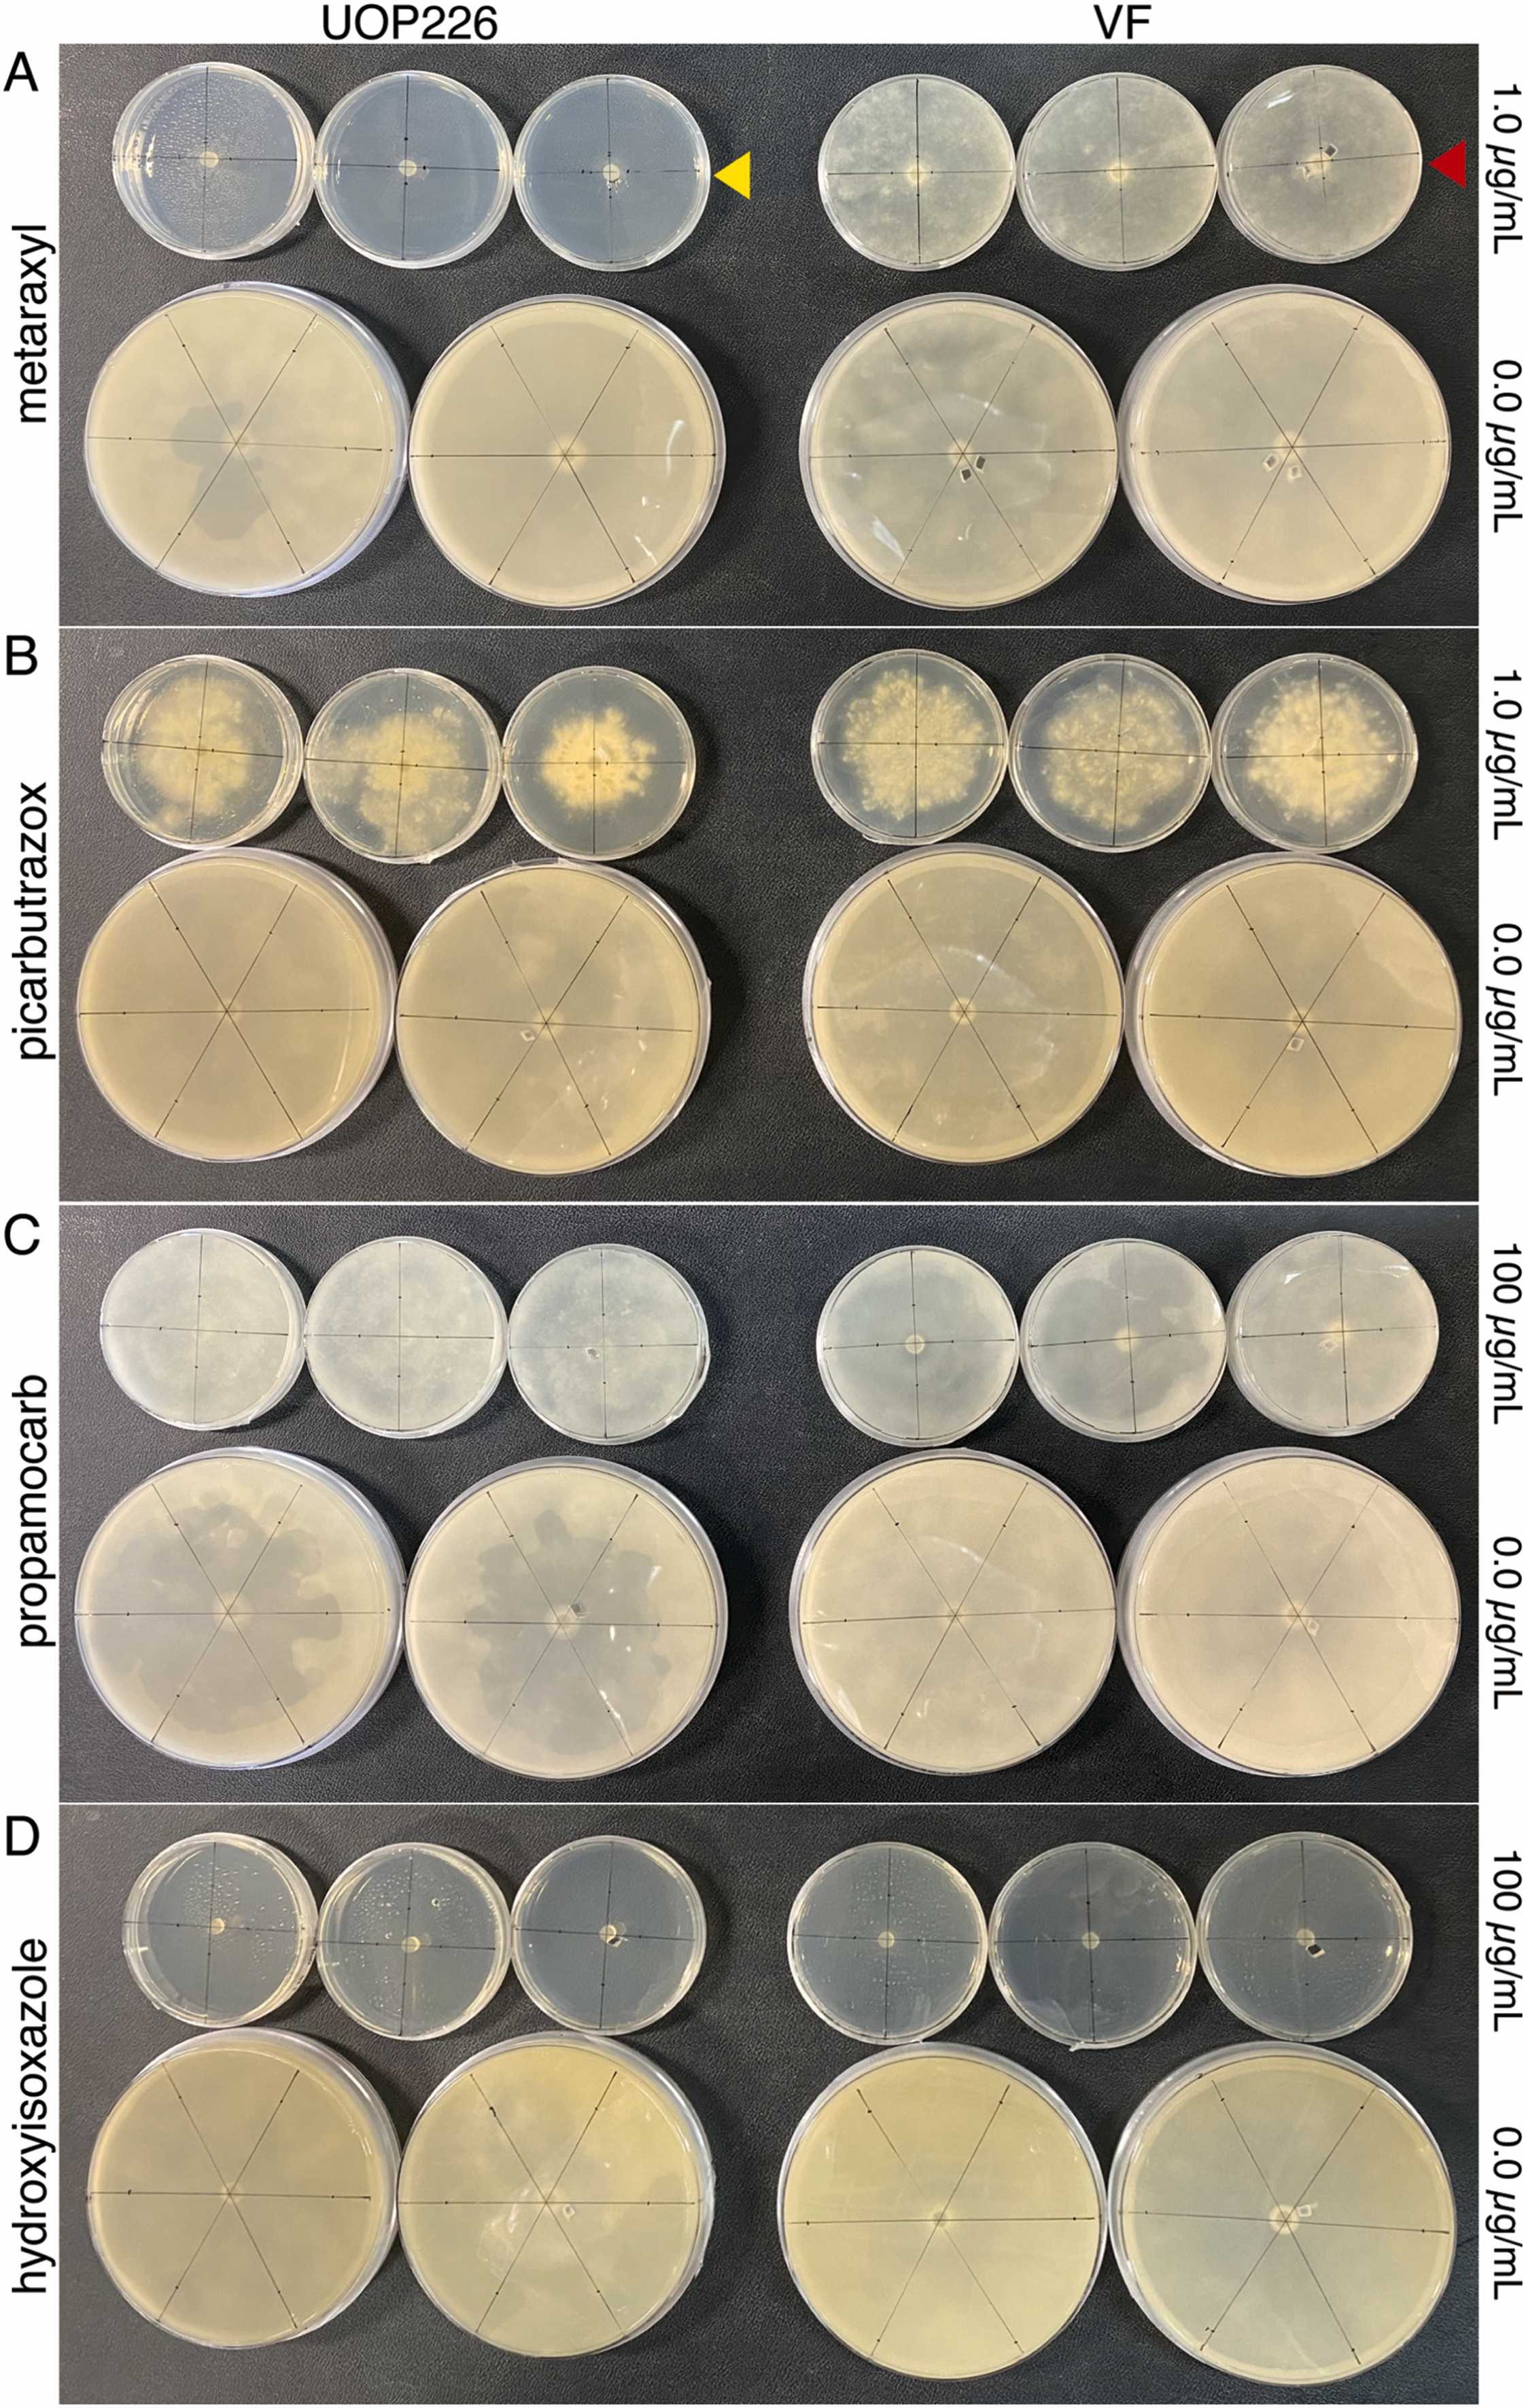 The effects of toti-like Pythium ultimum RNA virus 2 (PuRV2) elimination on fungicide sensitivity of Globisporangium ultimum UOP226. Mycelial growth of UOP226 and PuRV2-free isogenic line on potato dextrose agar (PDA) containing (A) metalaxyl, (B) picarbutrazox, (C) propamocarb, or (D) hydroxyisoxazole were photographed after incubation for 18 days -&nbsp; doi.org/10.1016/j.micres.2024.127742